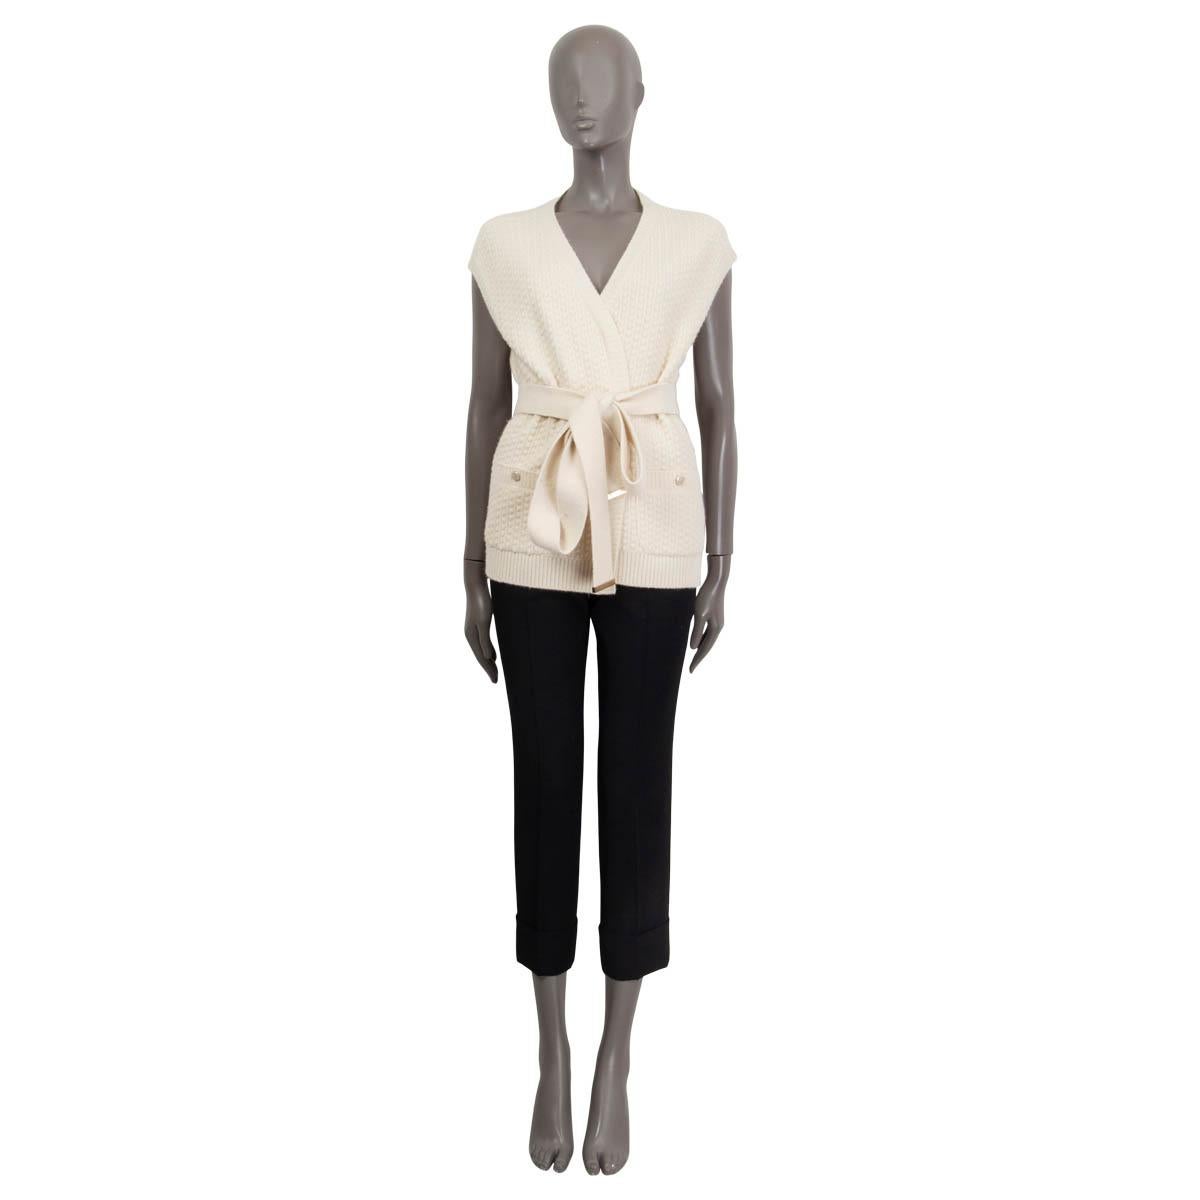 100% authentic Chanel Pre-Fall 2018 belted sleeveless knit cardigan in off-white cashmere (100%). Features two shut sewn 'CC' buttoned slit pockets on the front. Unlined. Has been worn and is in excellent condition. Matching pants available in